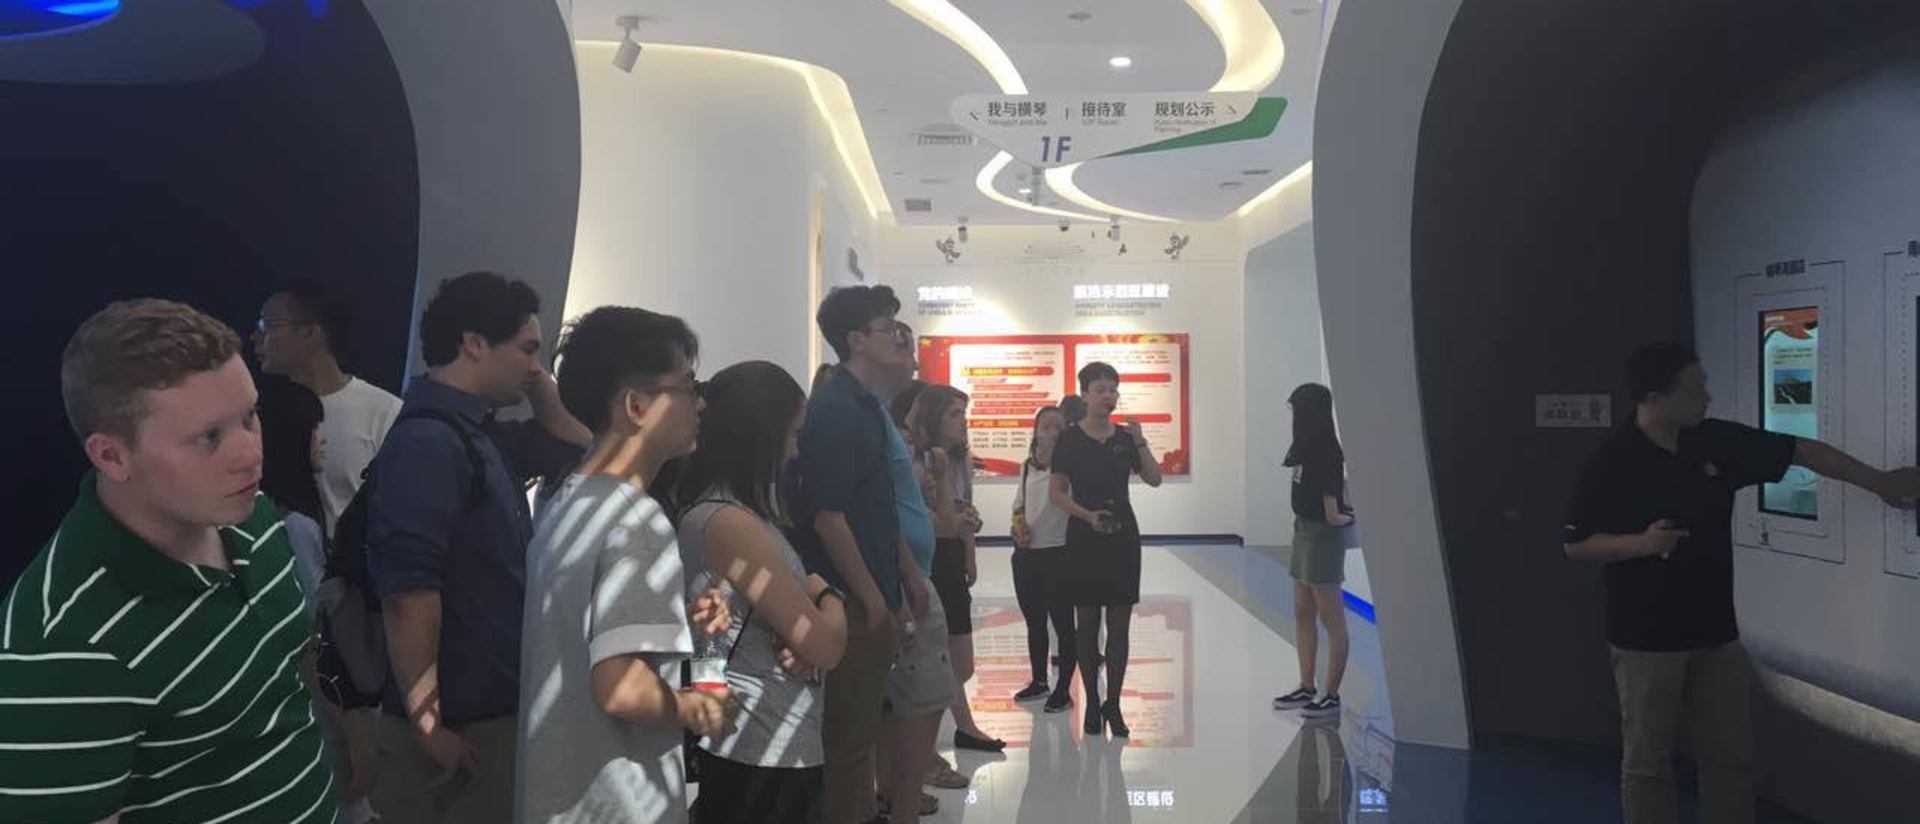 Business students touring Chinese business 